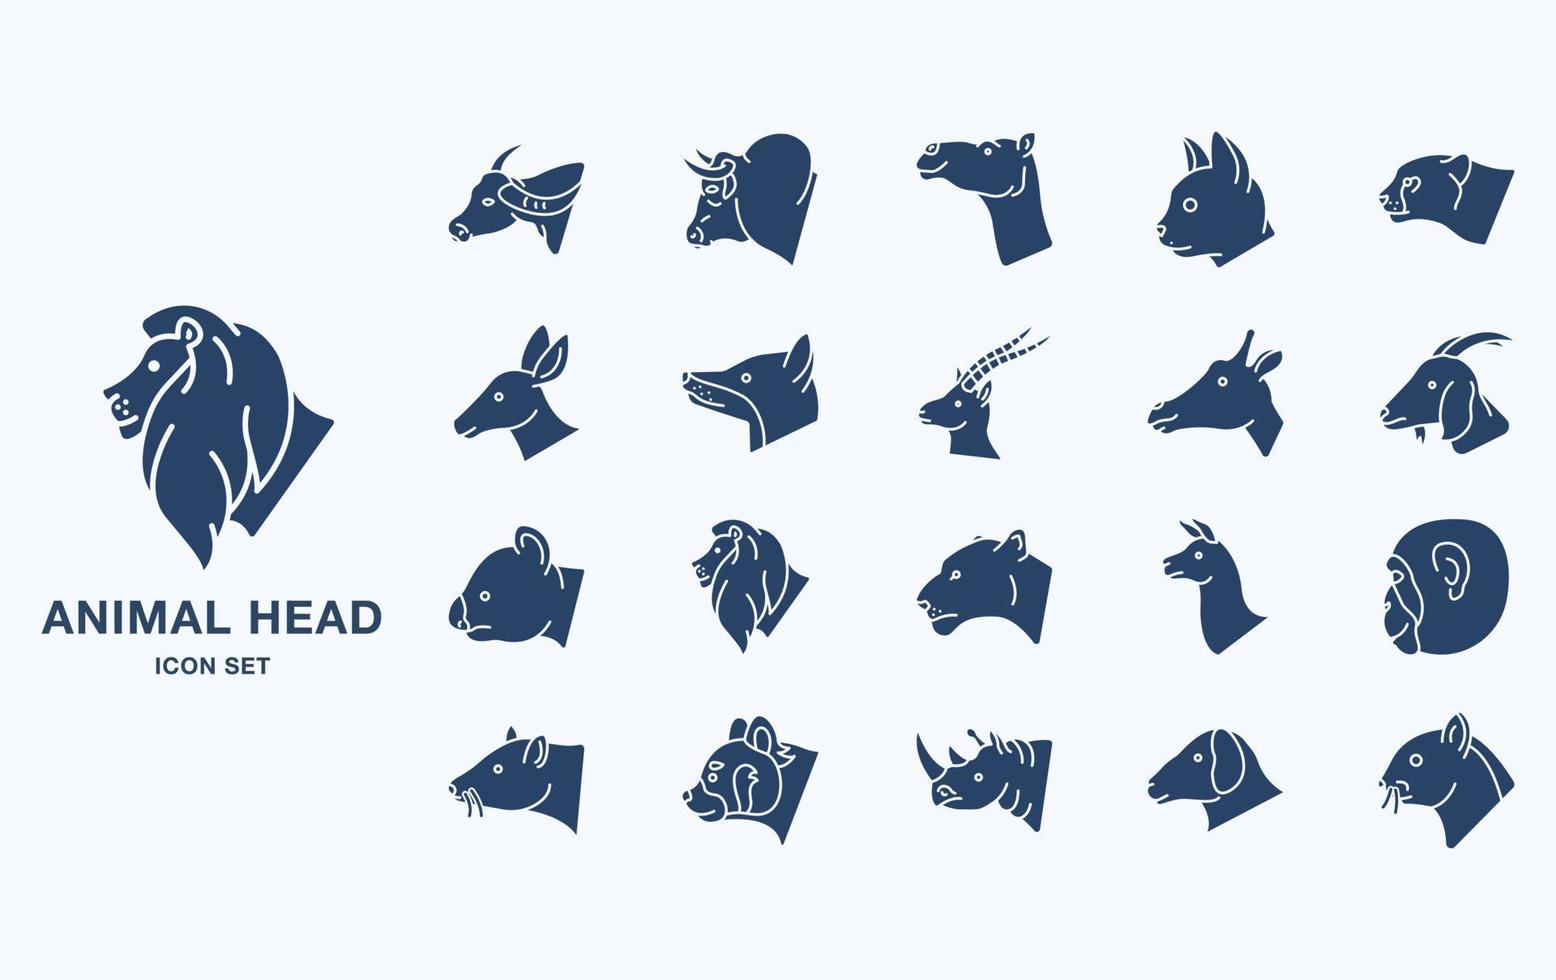 Variety of animal head icon set with side view vector